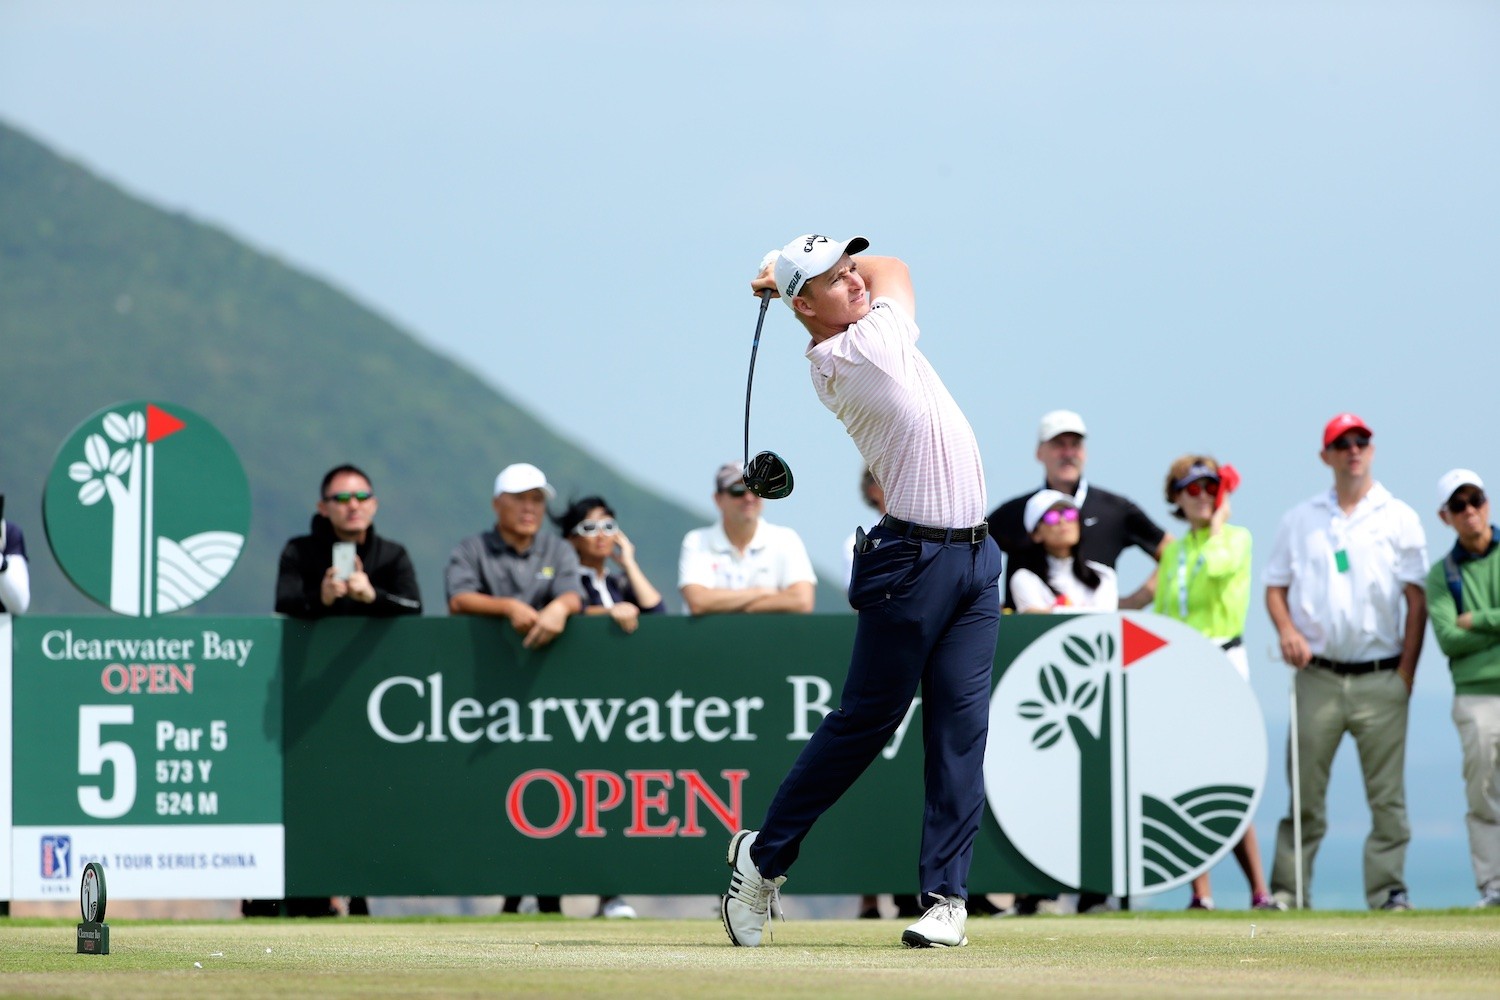 New Zealand’s Nick Voke is five strokes ahead of the field going into final round of the Clearwater Bay Open. Photos: PGA Tour-China